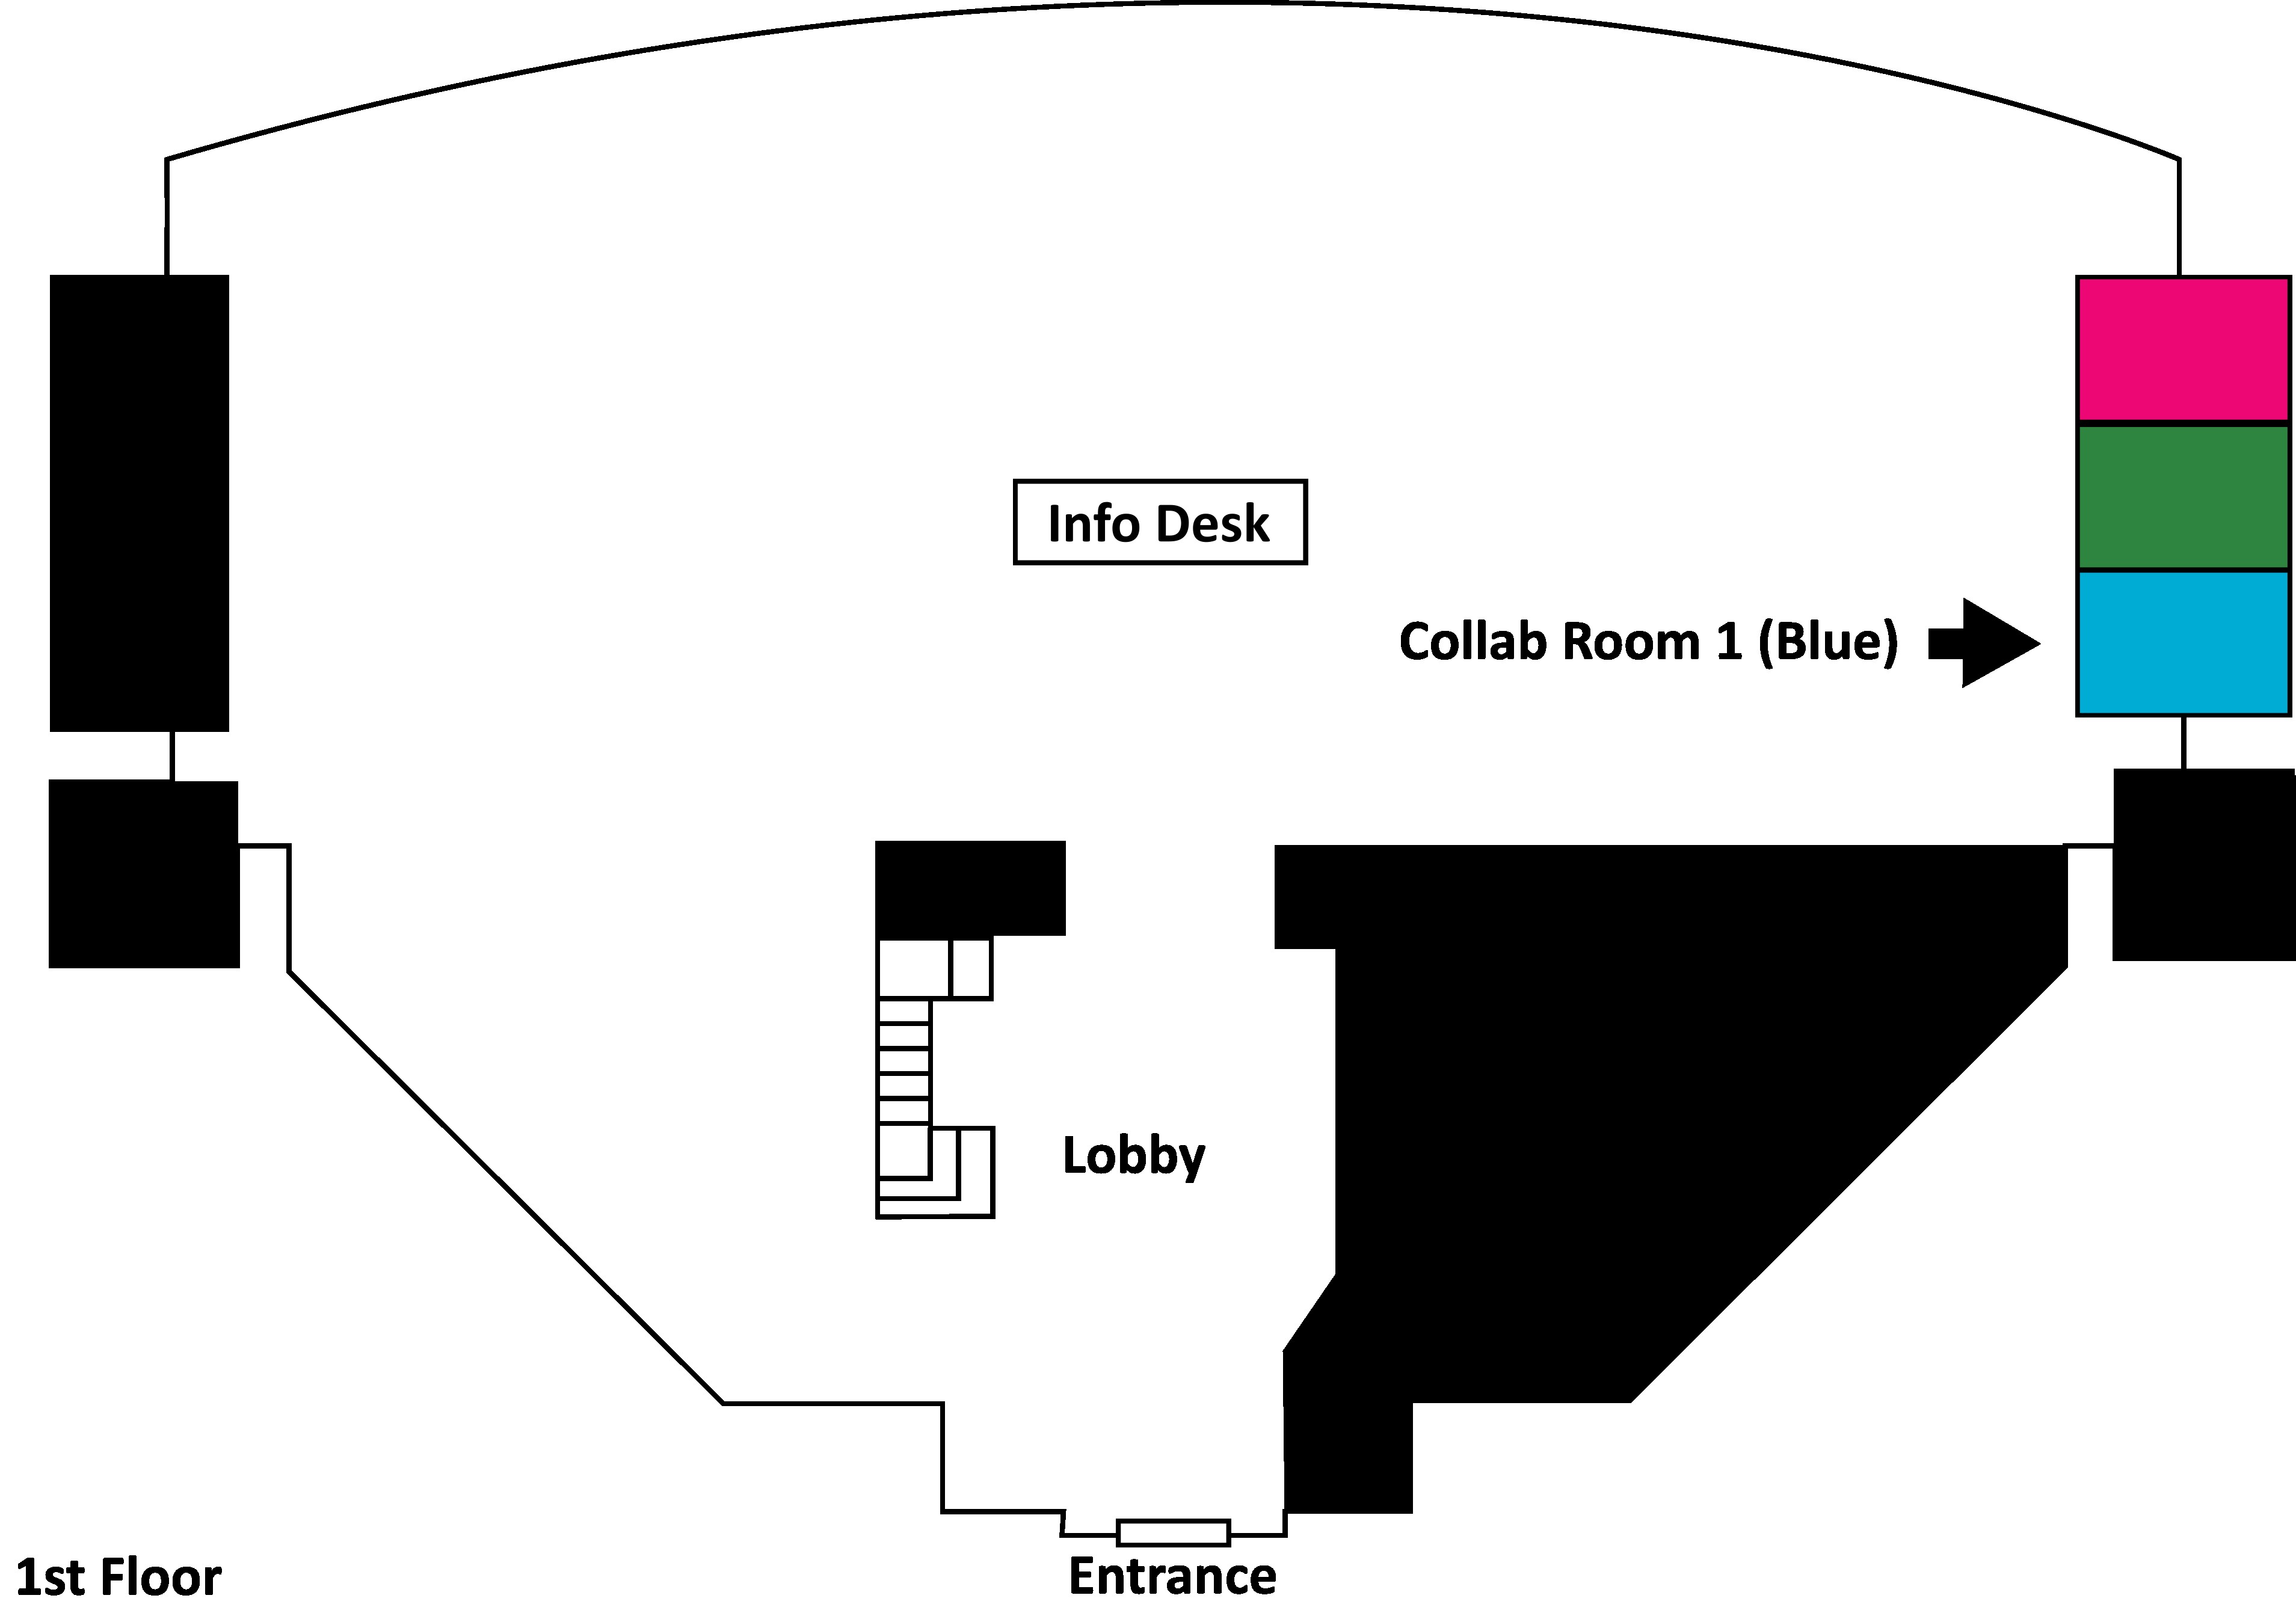 A map of the first floor of the library. There is an arrow pointing to a blue room on the right side of the map. There is also a green and pink room above the blue room.